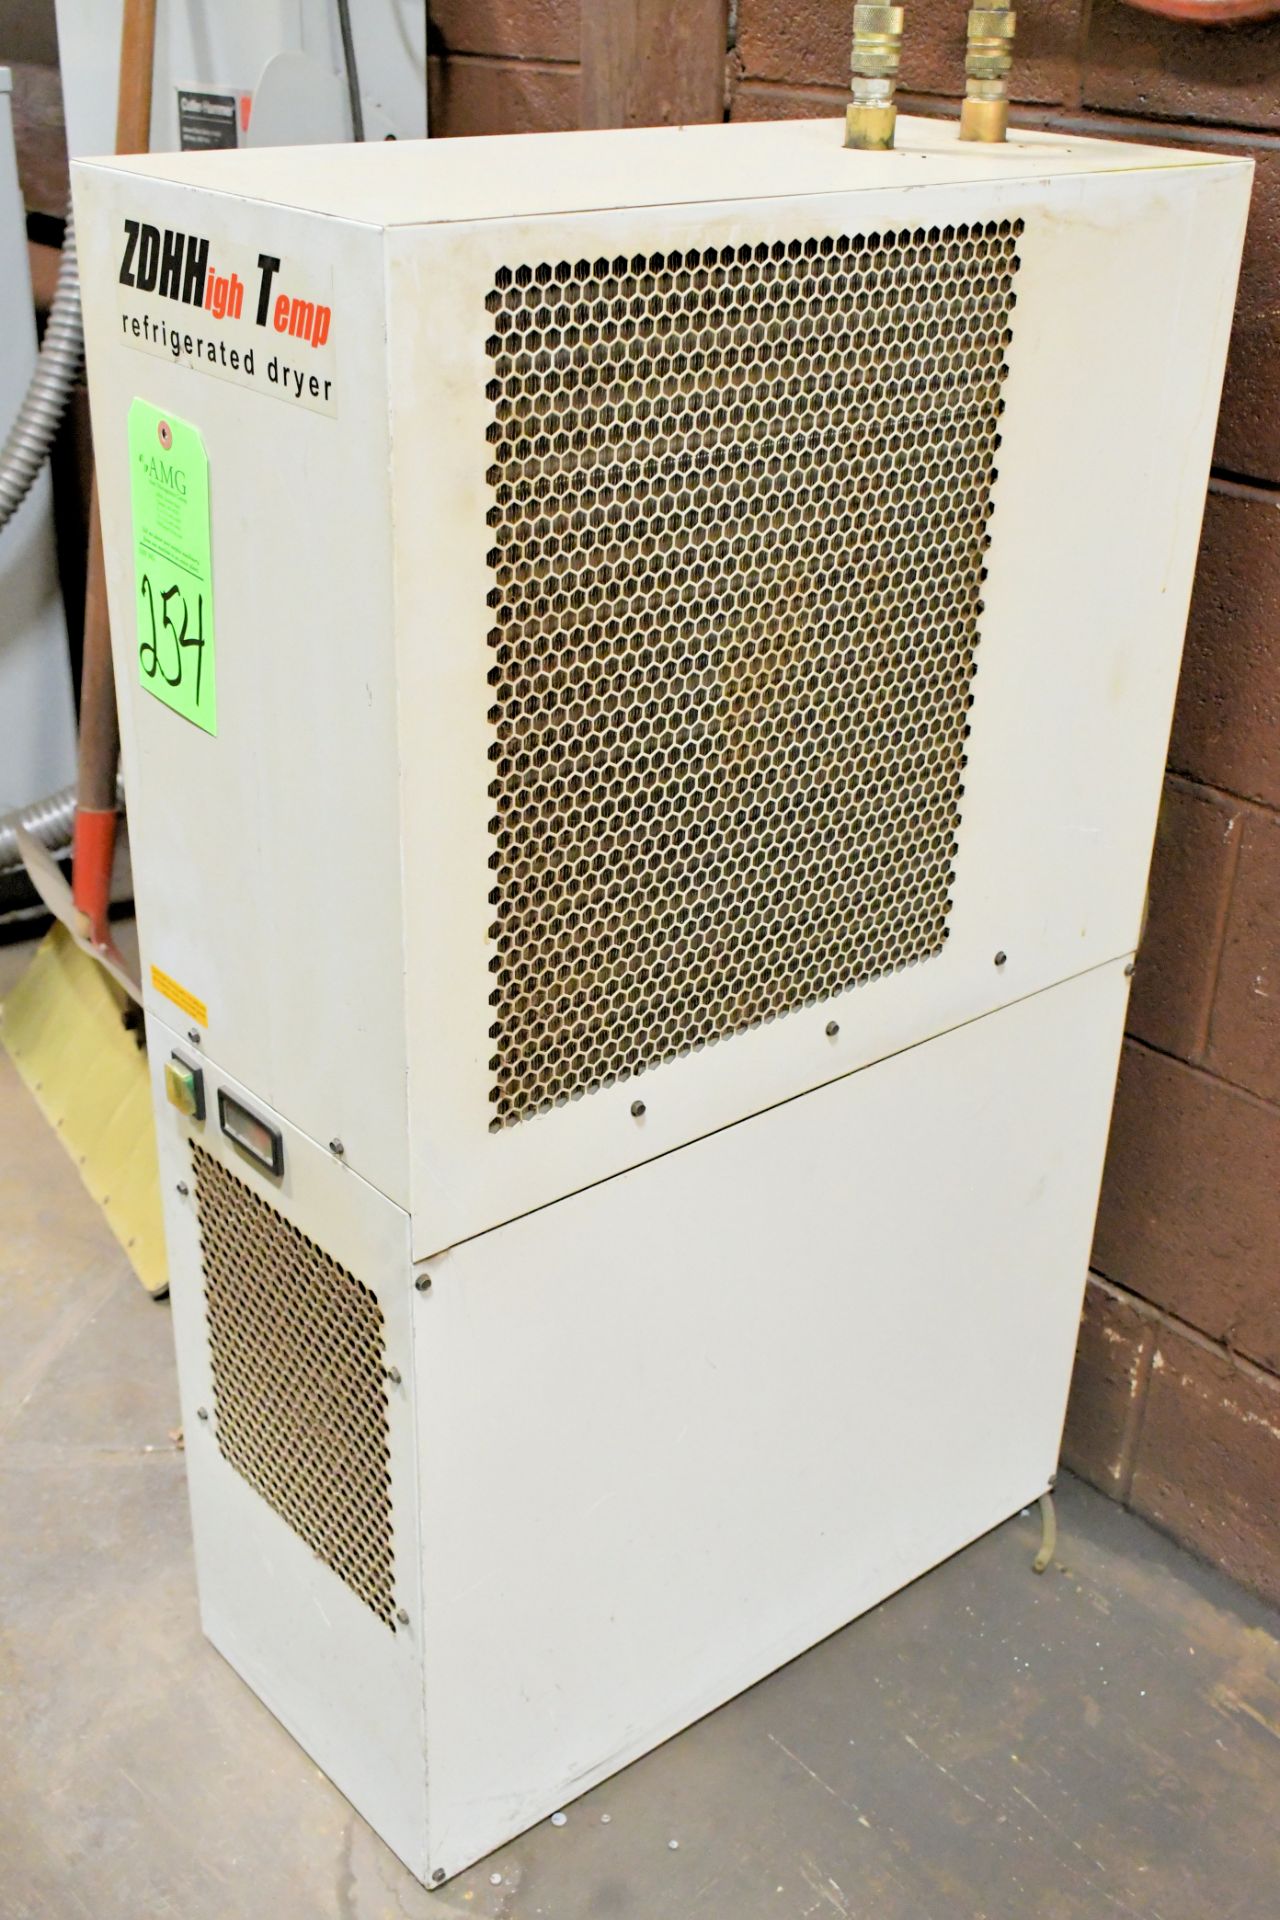 ZDH High Temp Refrigerated Dryer System - Image 2 of 3